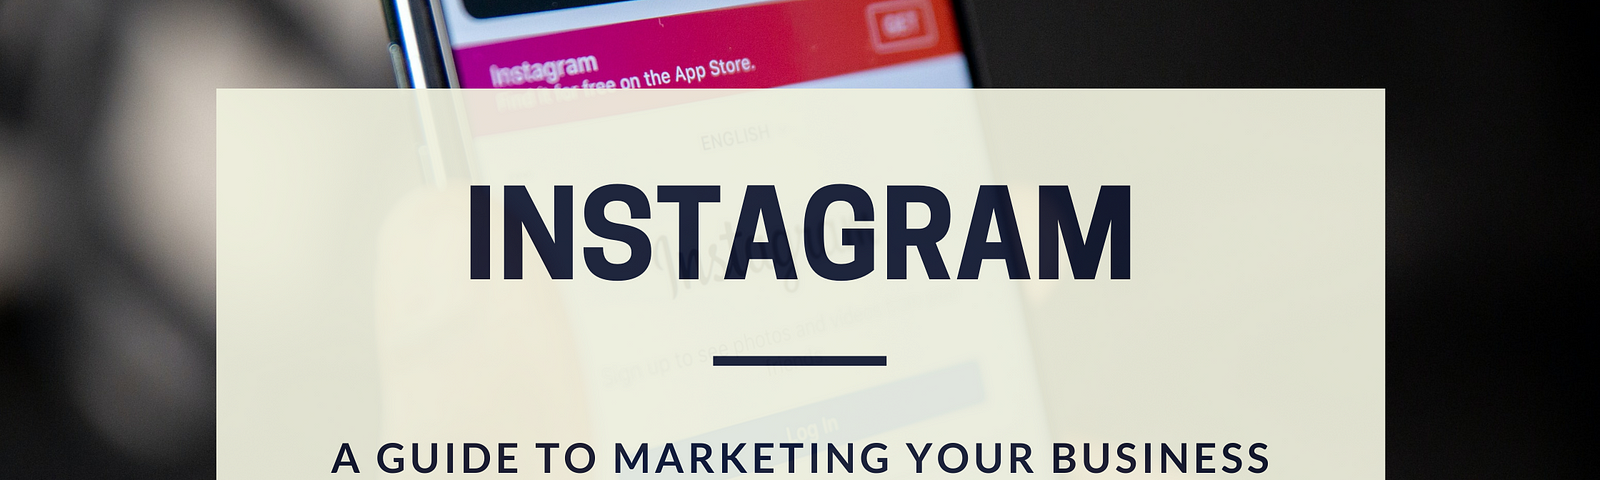 A guide to Instagram marketing